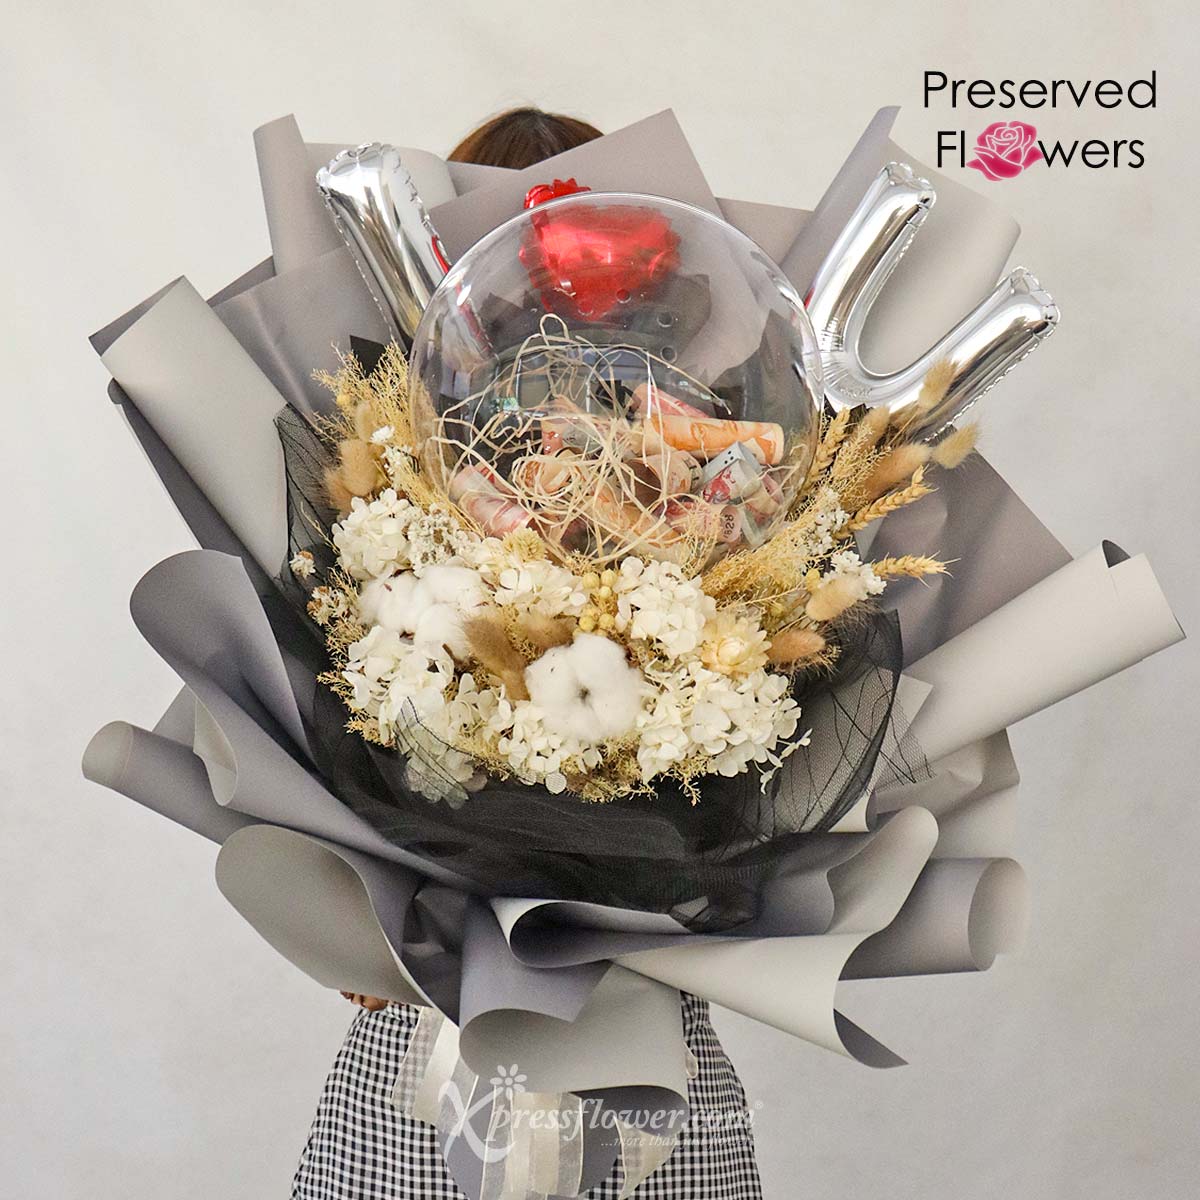 PR2319 Eternal Enchantment (Preserved Flowers with I Love You" Balloons) 1b